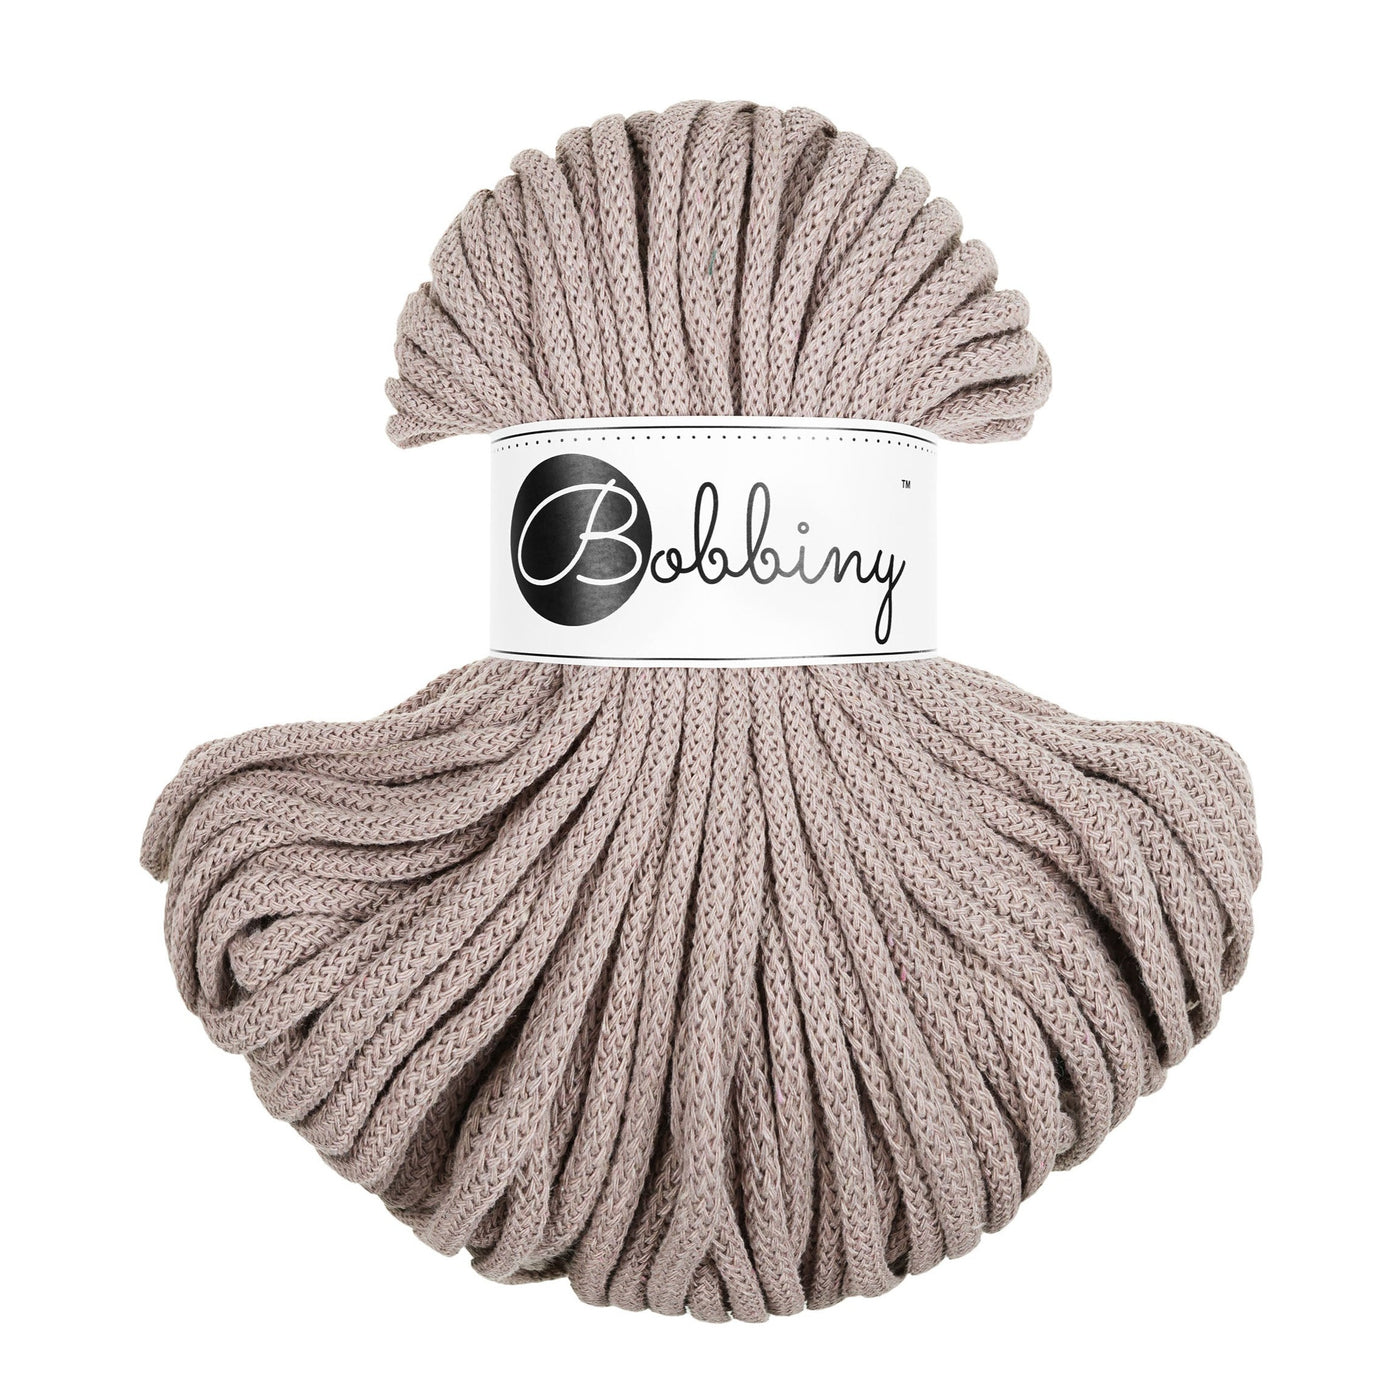 Bobbiny braided cord 5mm 50m in pearl shade